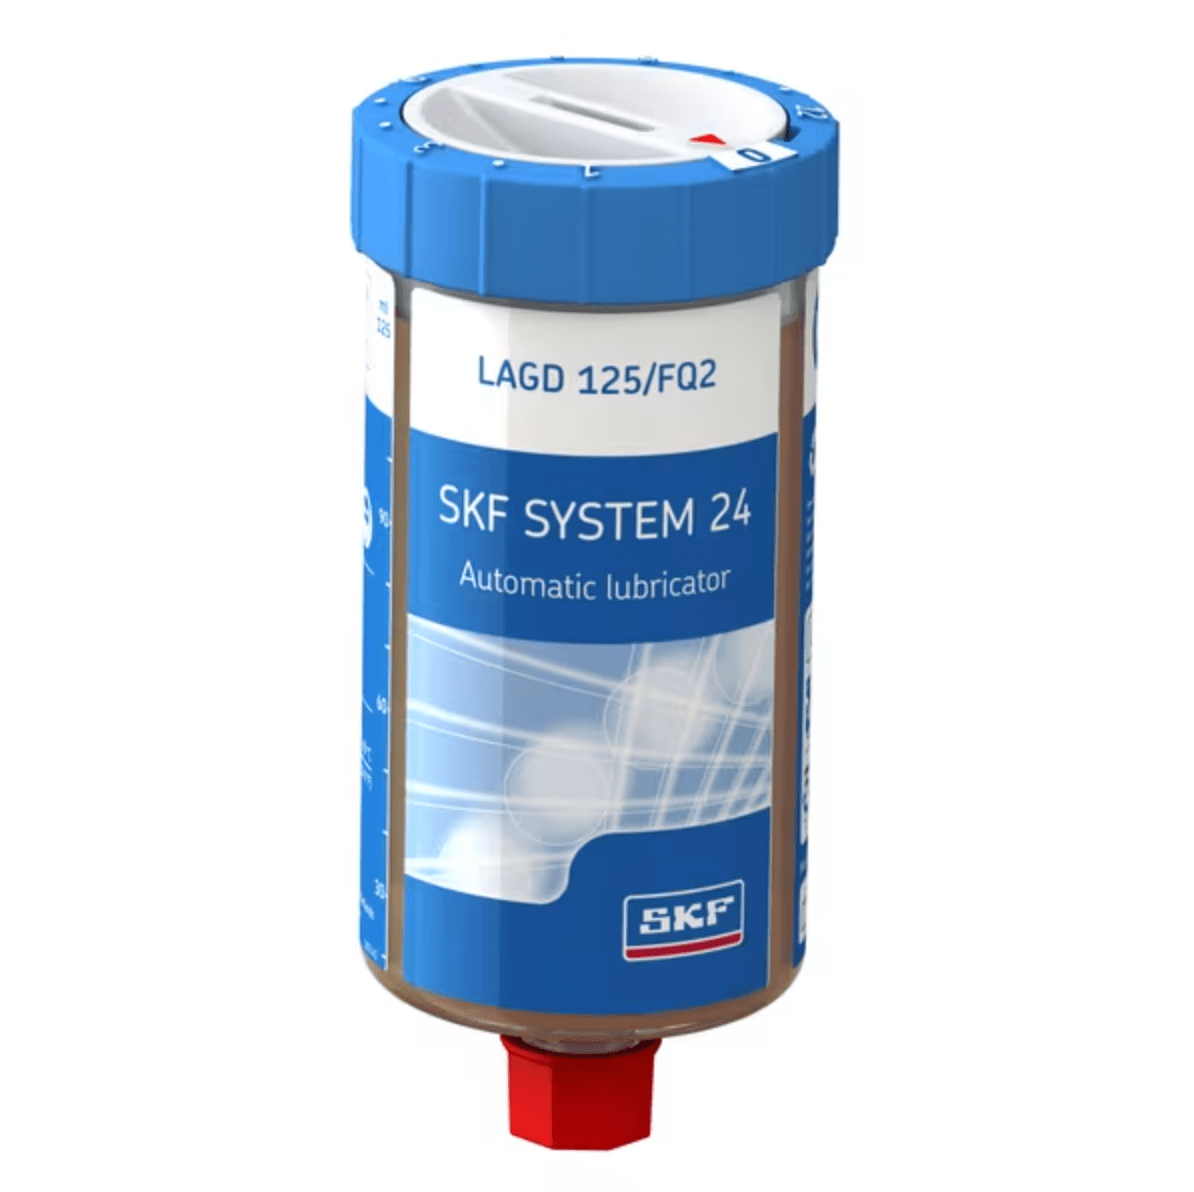 SKF LAGD 125/FQ2 Automatic lubricator with LGFQ 2 Food grade, high load and wide temperature grease, 125ml - Apollo Industries llc